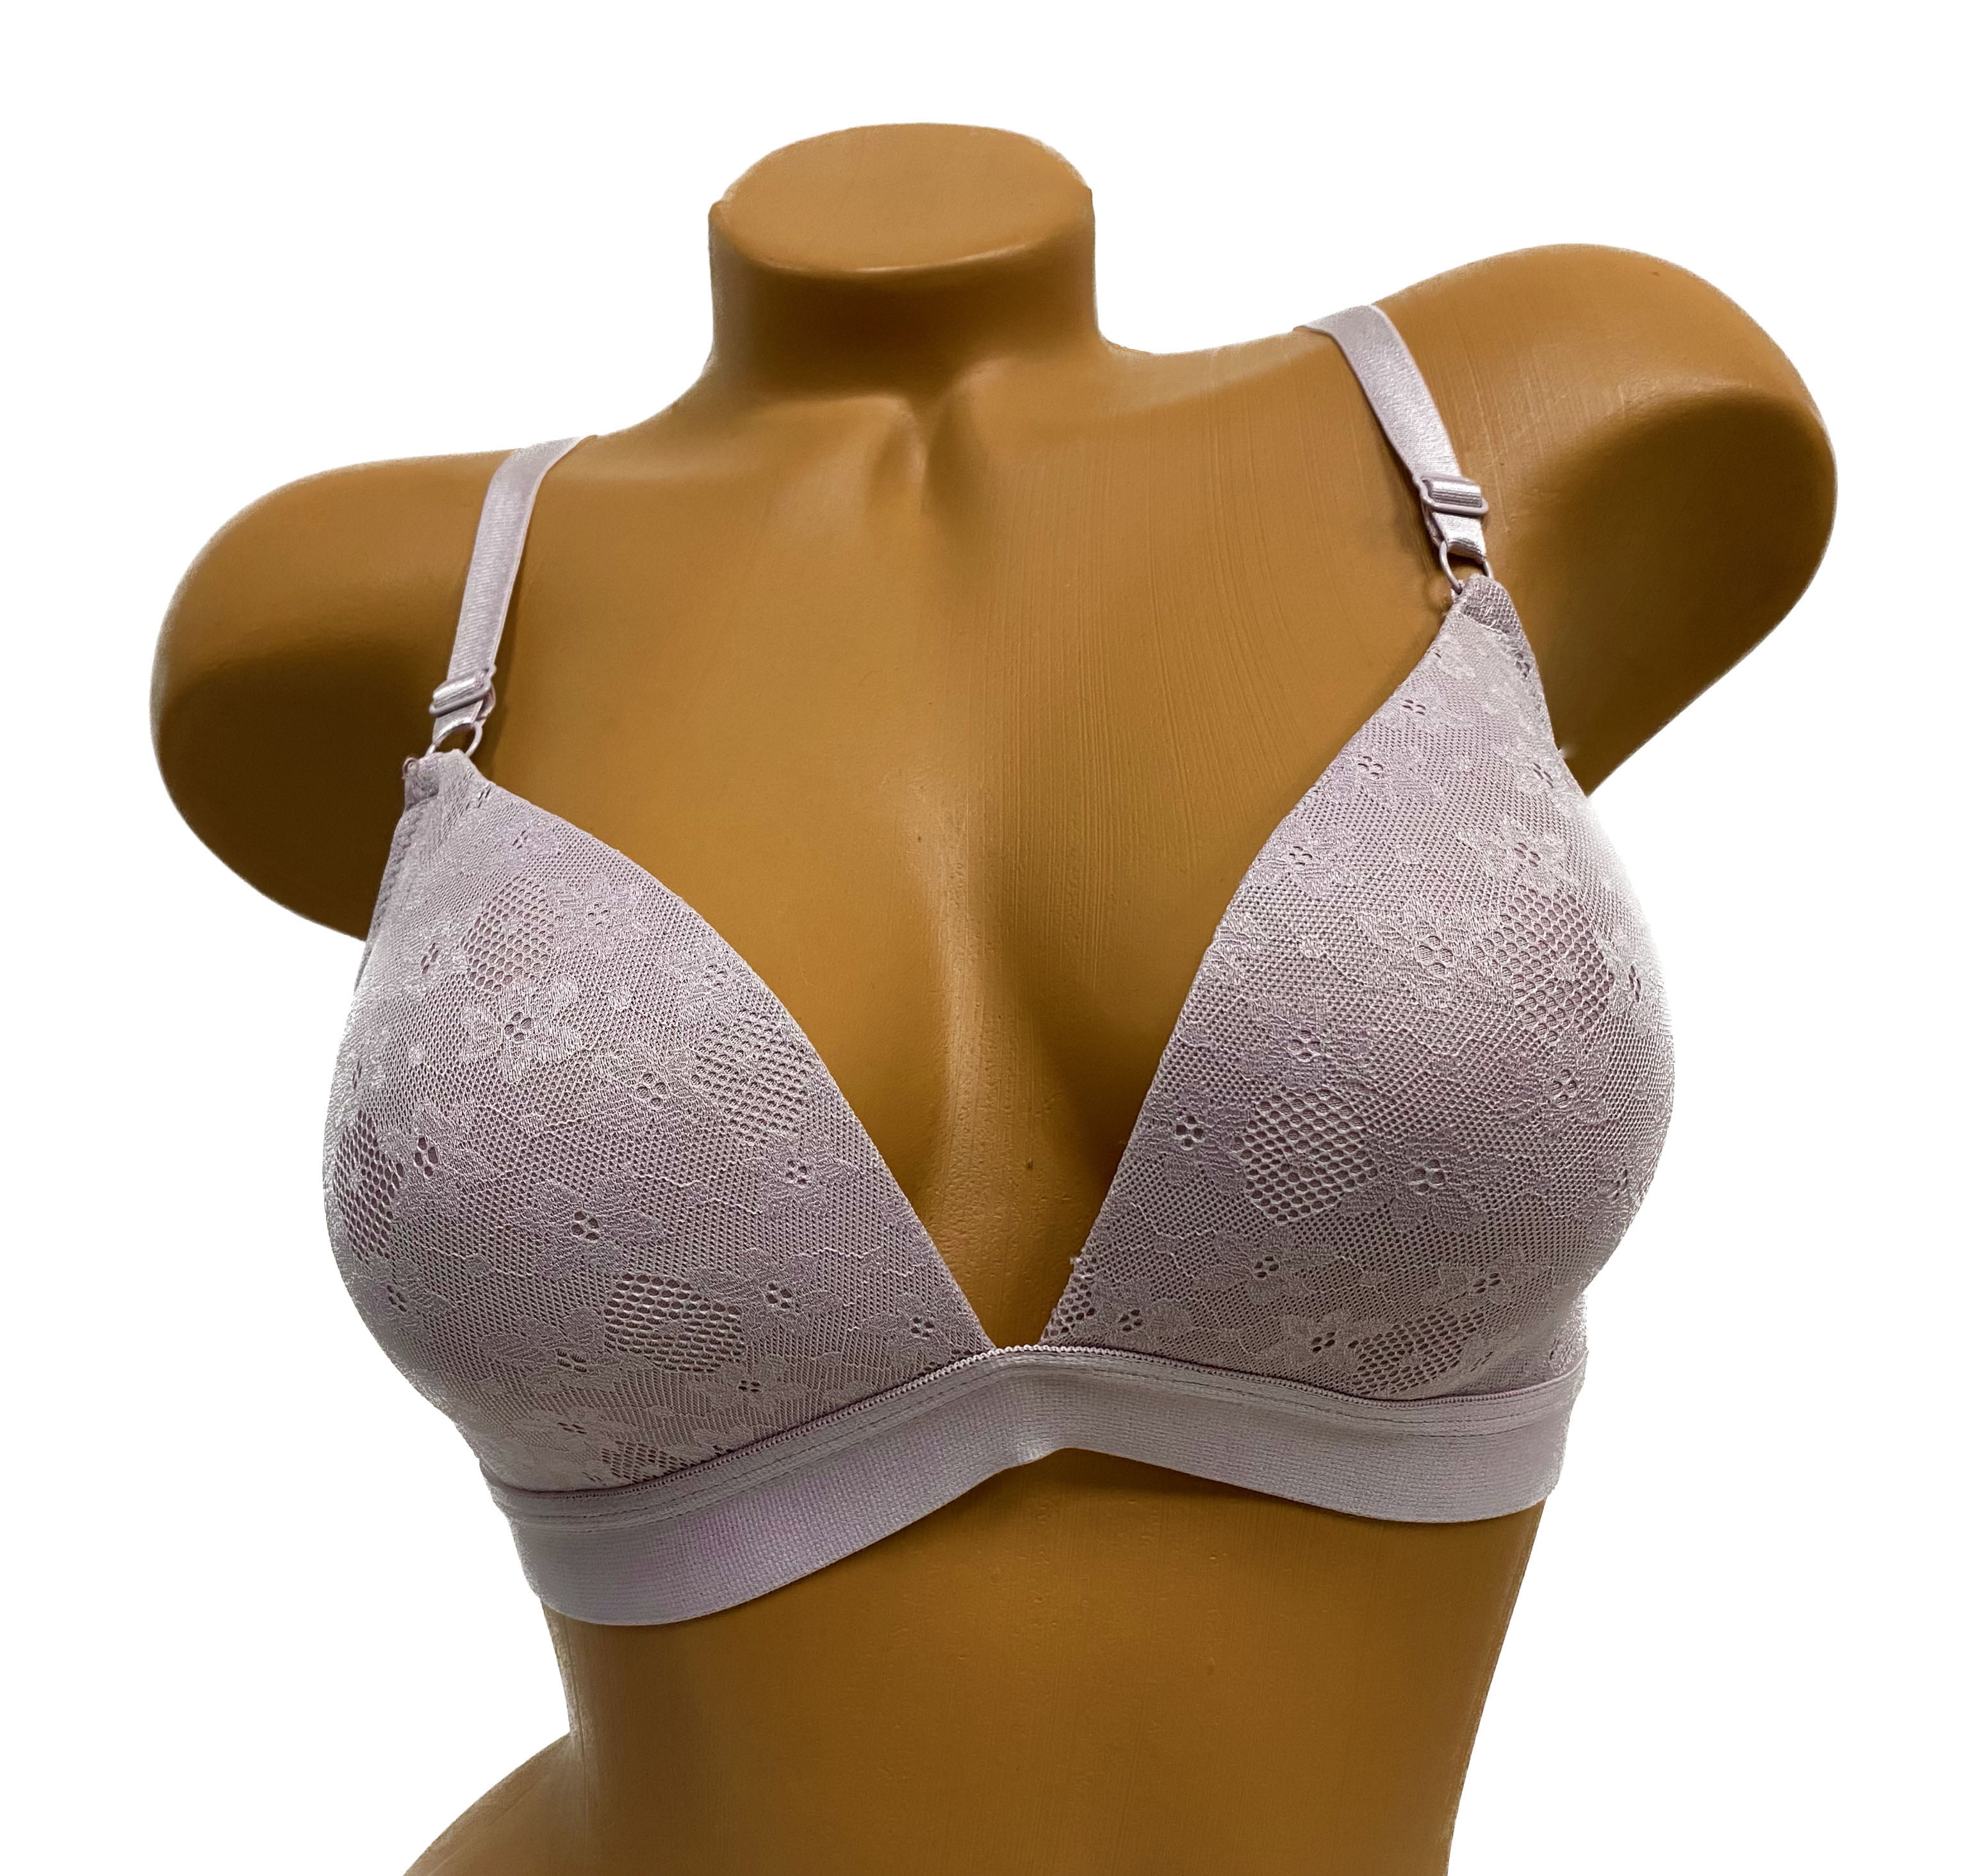 Women Bras 6 pack of Basic No Wire Free Wireless Bra B cup C cup Size 40C  (S6319)